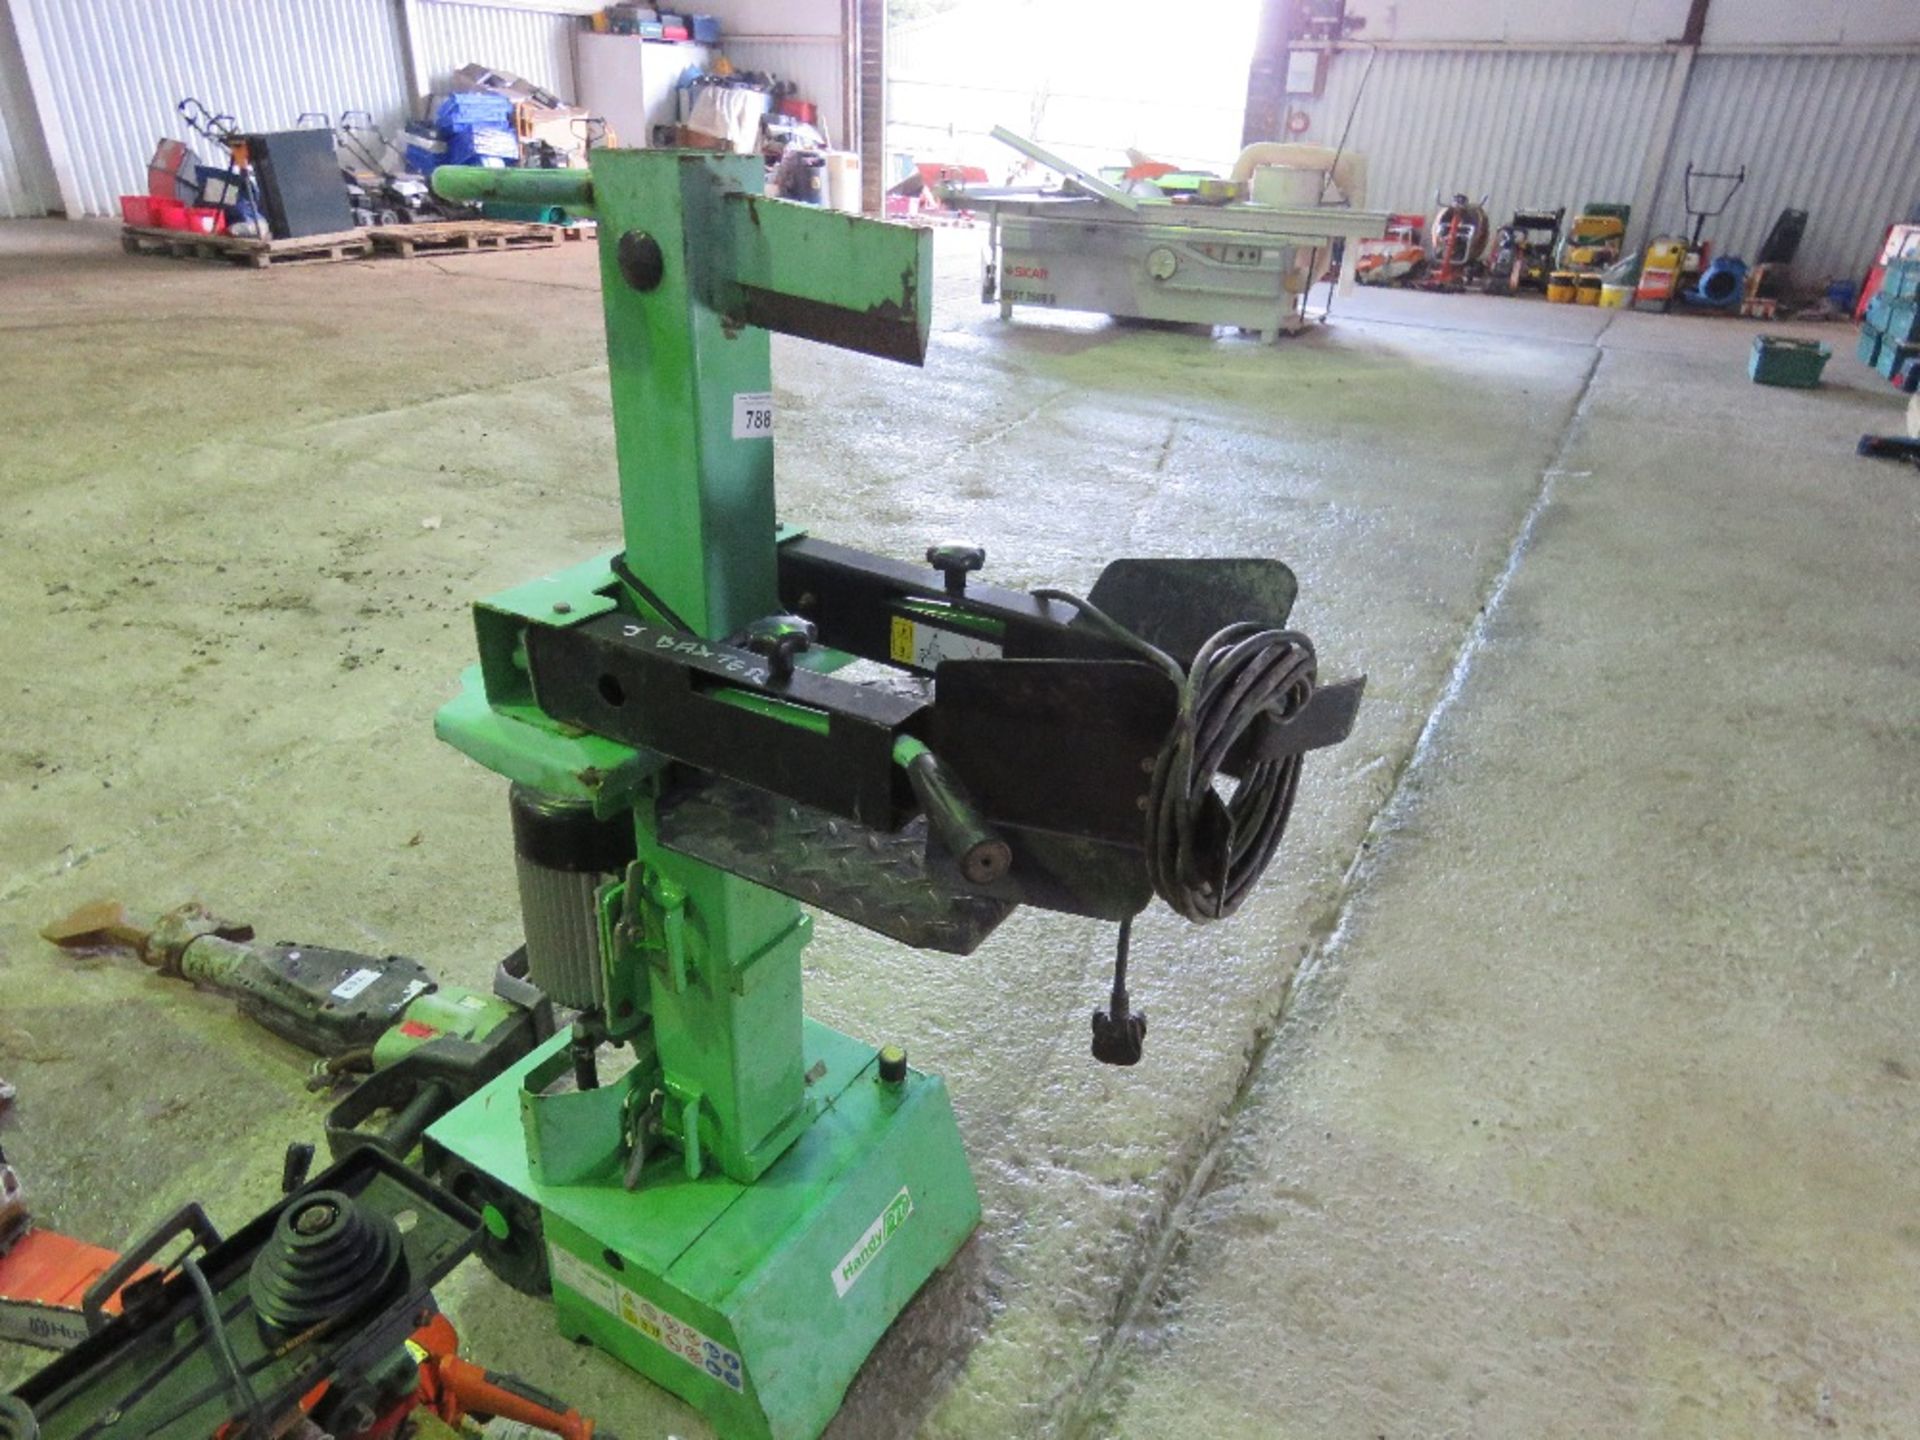 HANDYPRO 240VOLT POWERED UPRIGHT LOG SPLITTER, CONDITION UNKNOWN. THIS LOT IS SOLD UNDER THE AUCT - Image 3 of 5